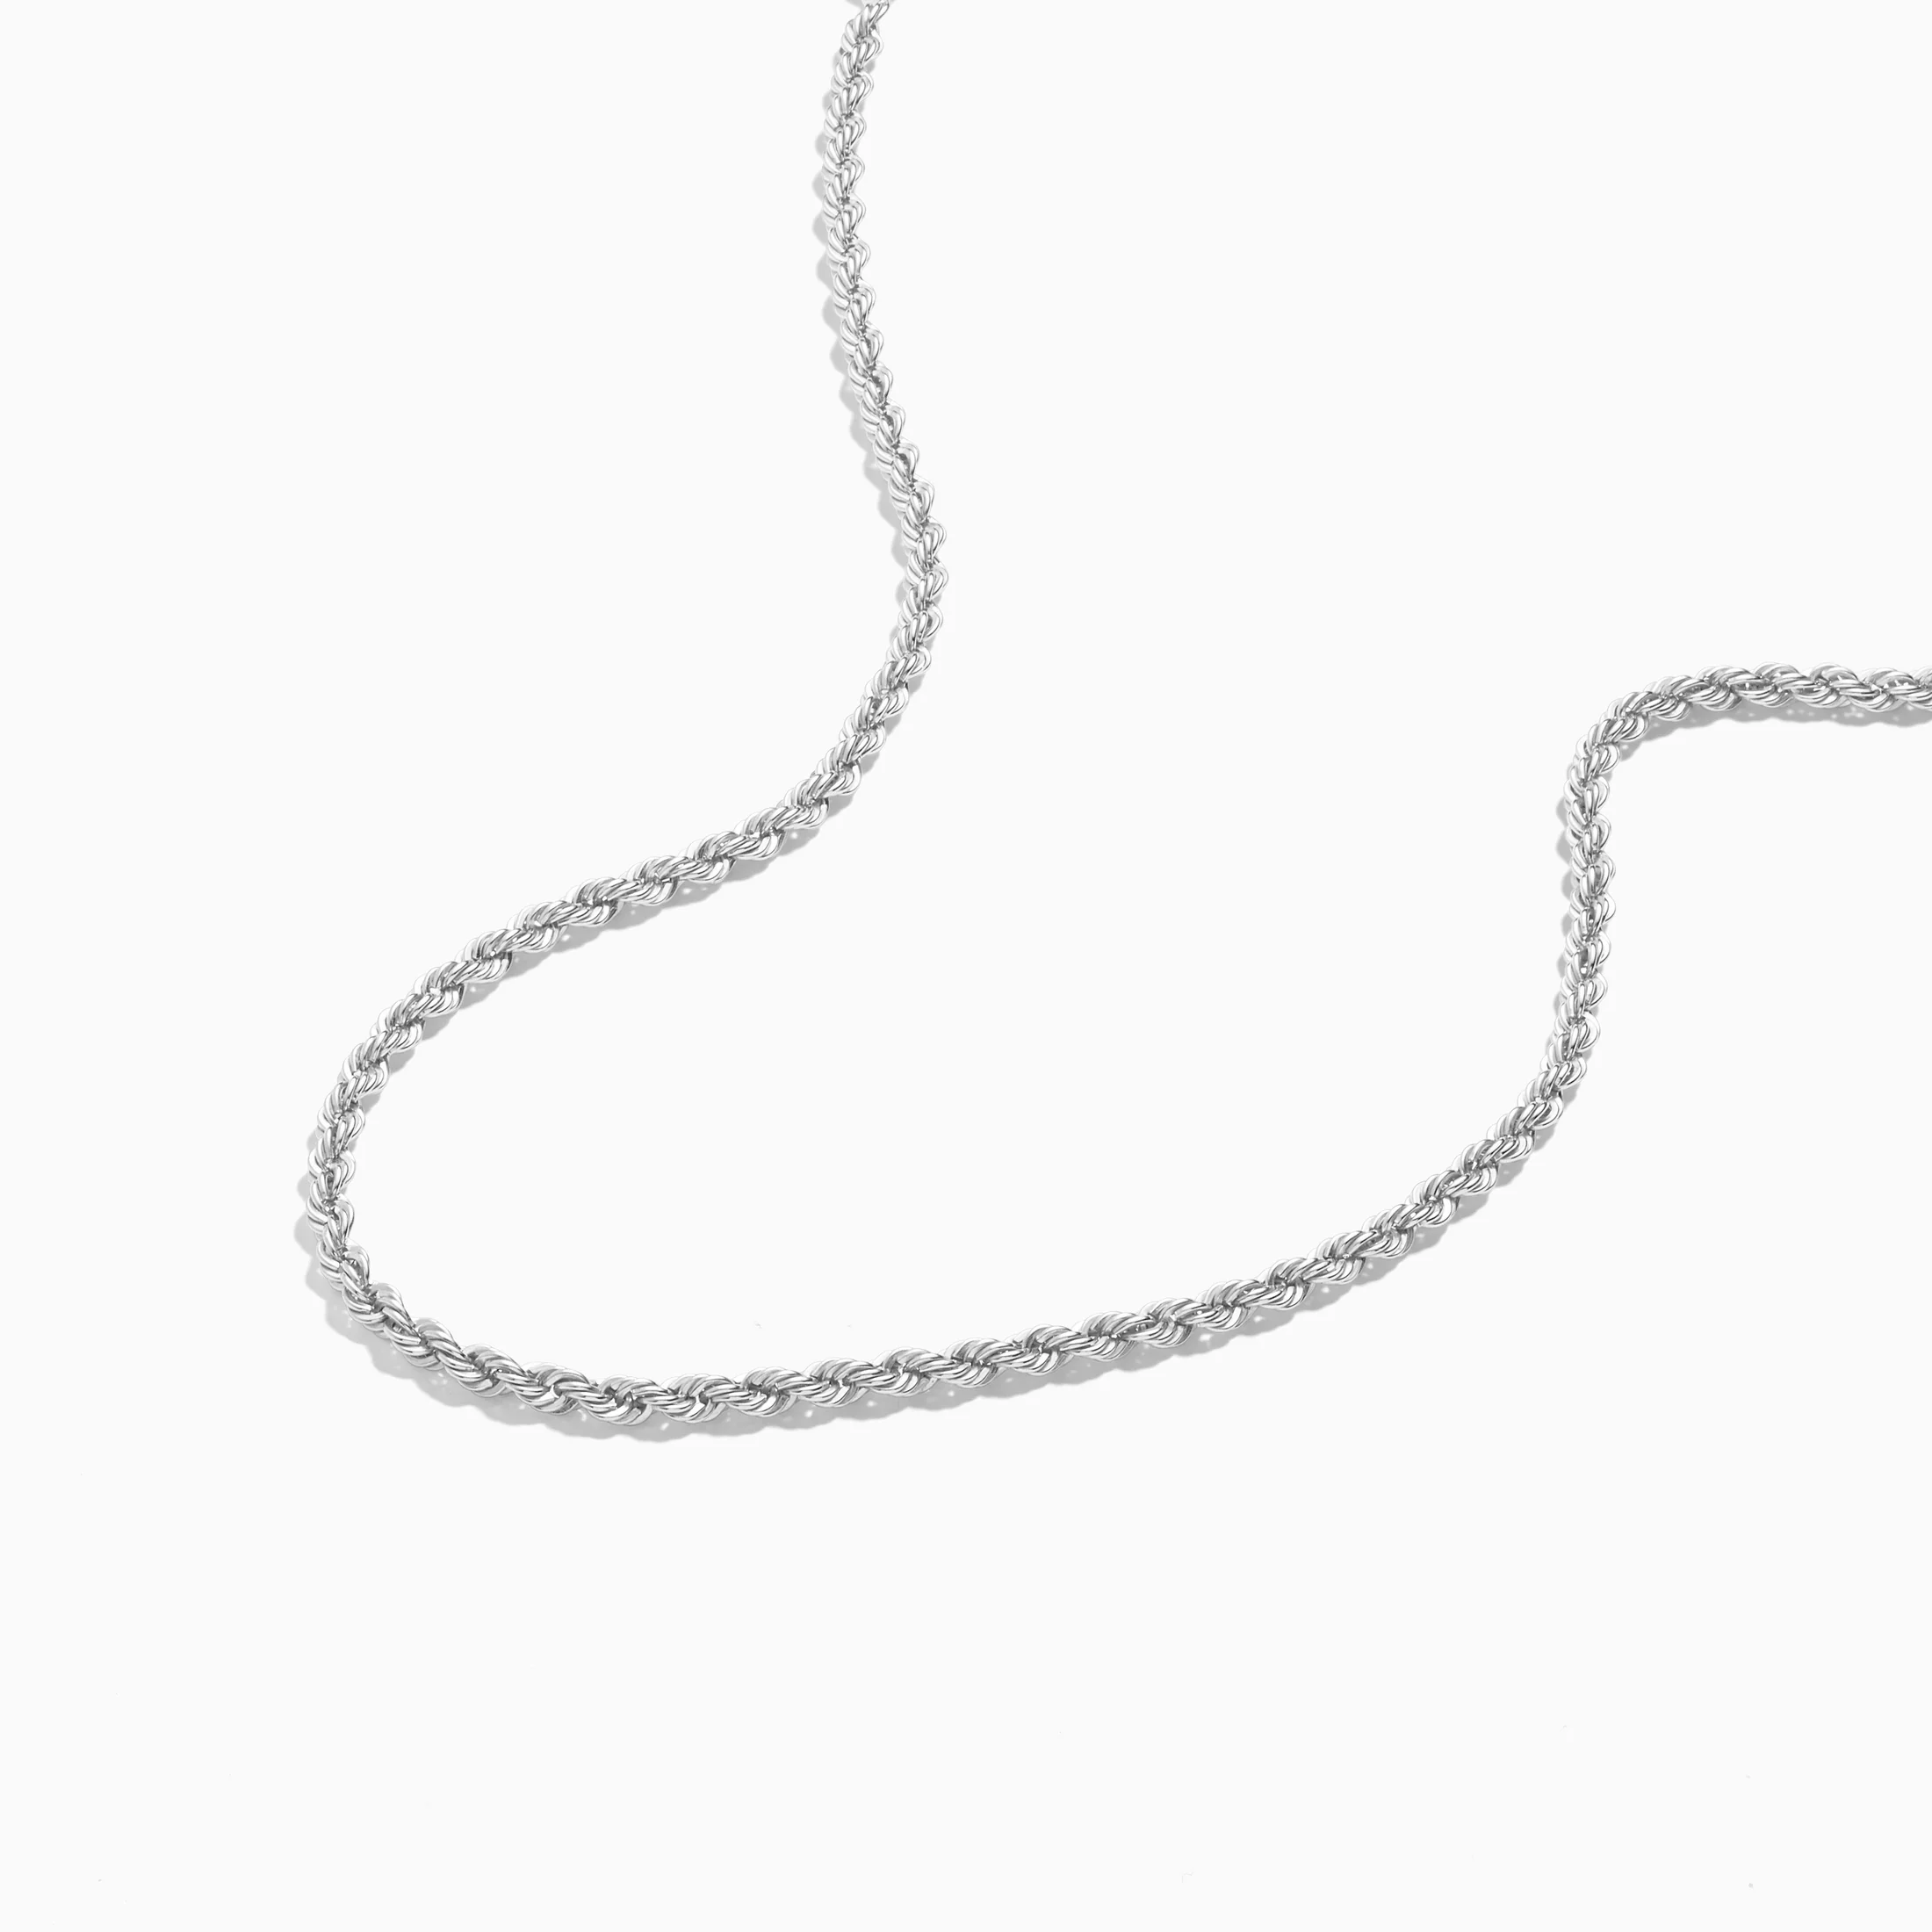 Eline Rosina - Twisted Rope Necklace Silver